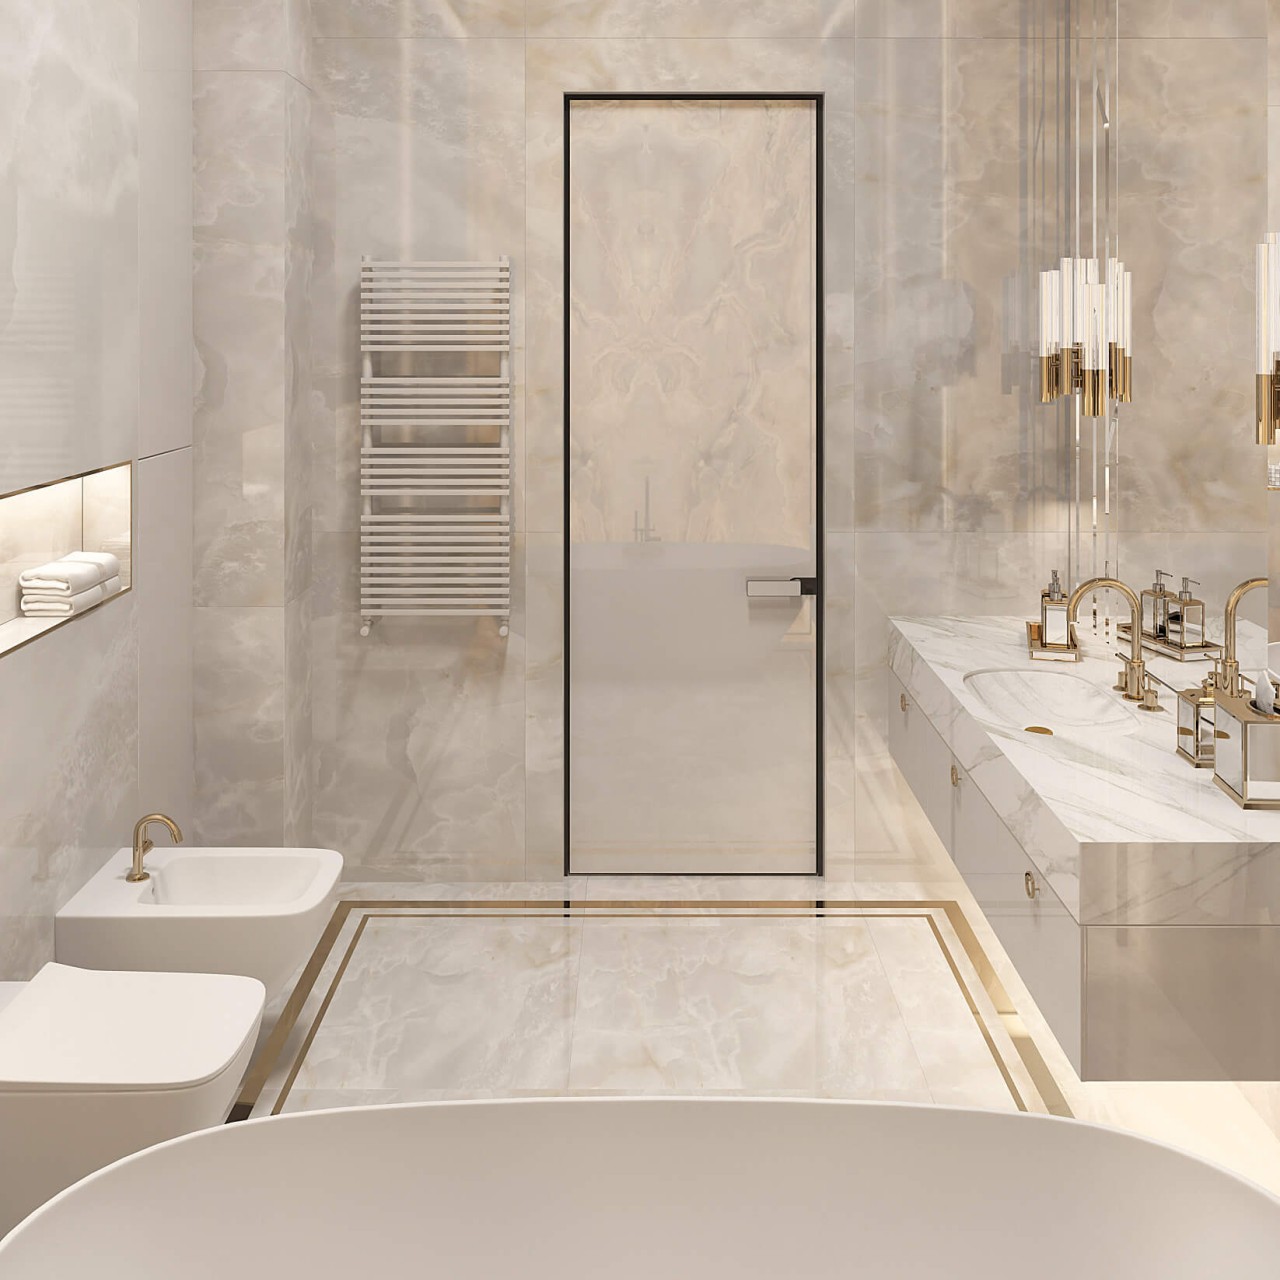 https://www.yankodesign.com/images/design_news/2023/04/what-is-the-secret-behind-a-luxurious-bathroom-decor/3-material-2.jpg